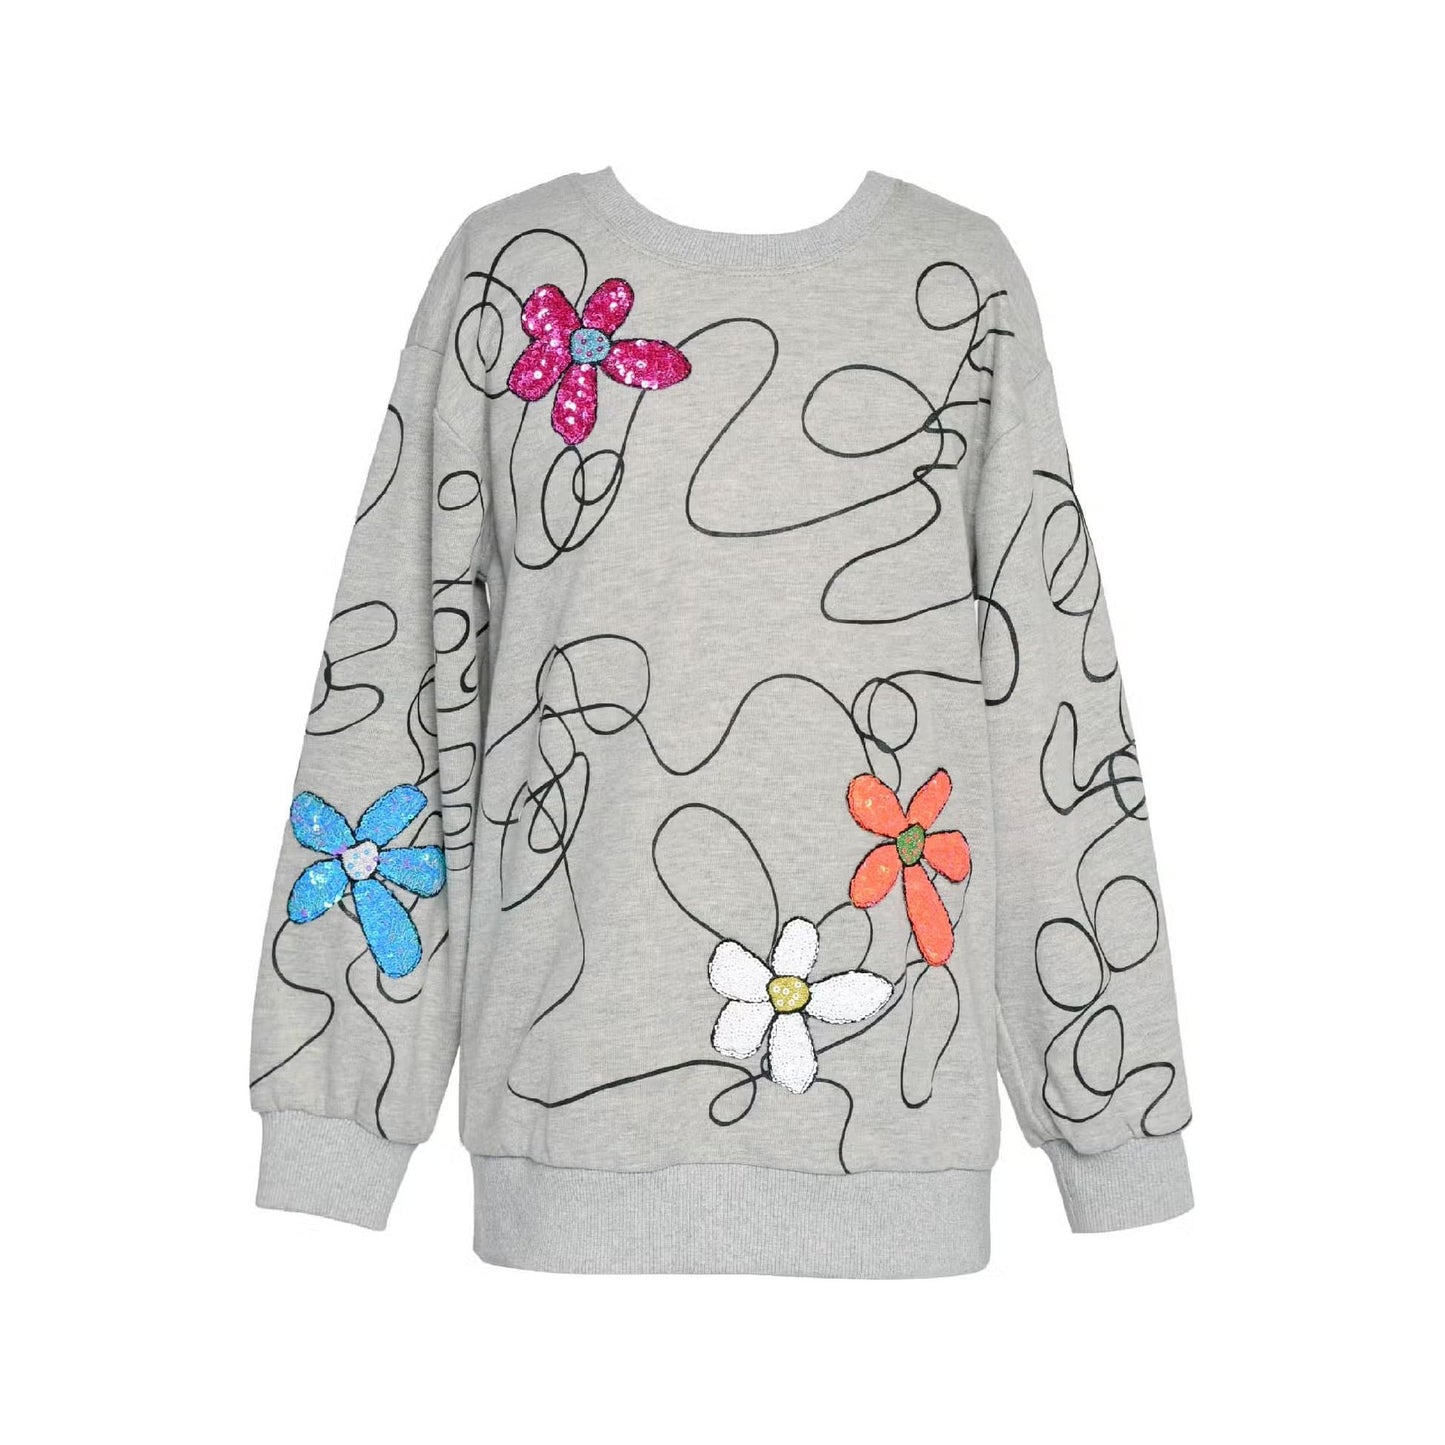 Sweatshirt Tunic with Scribble and Sequin Flowers